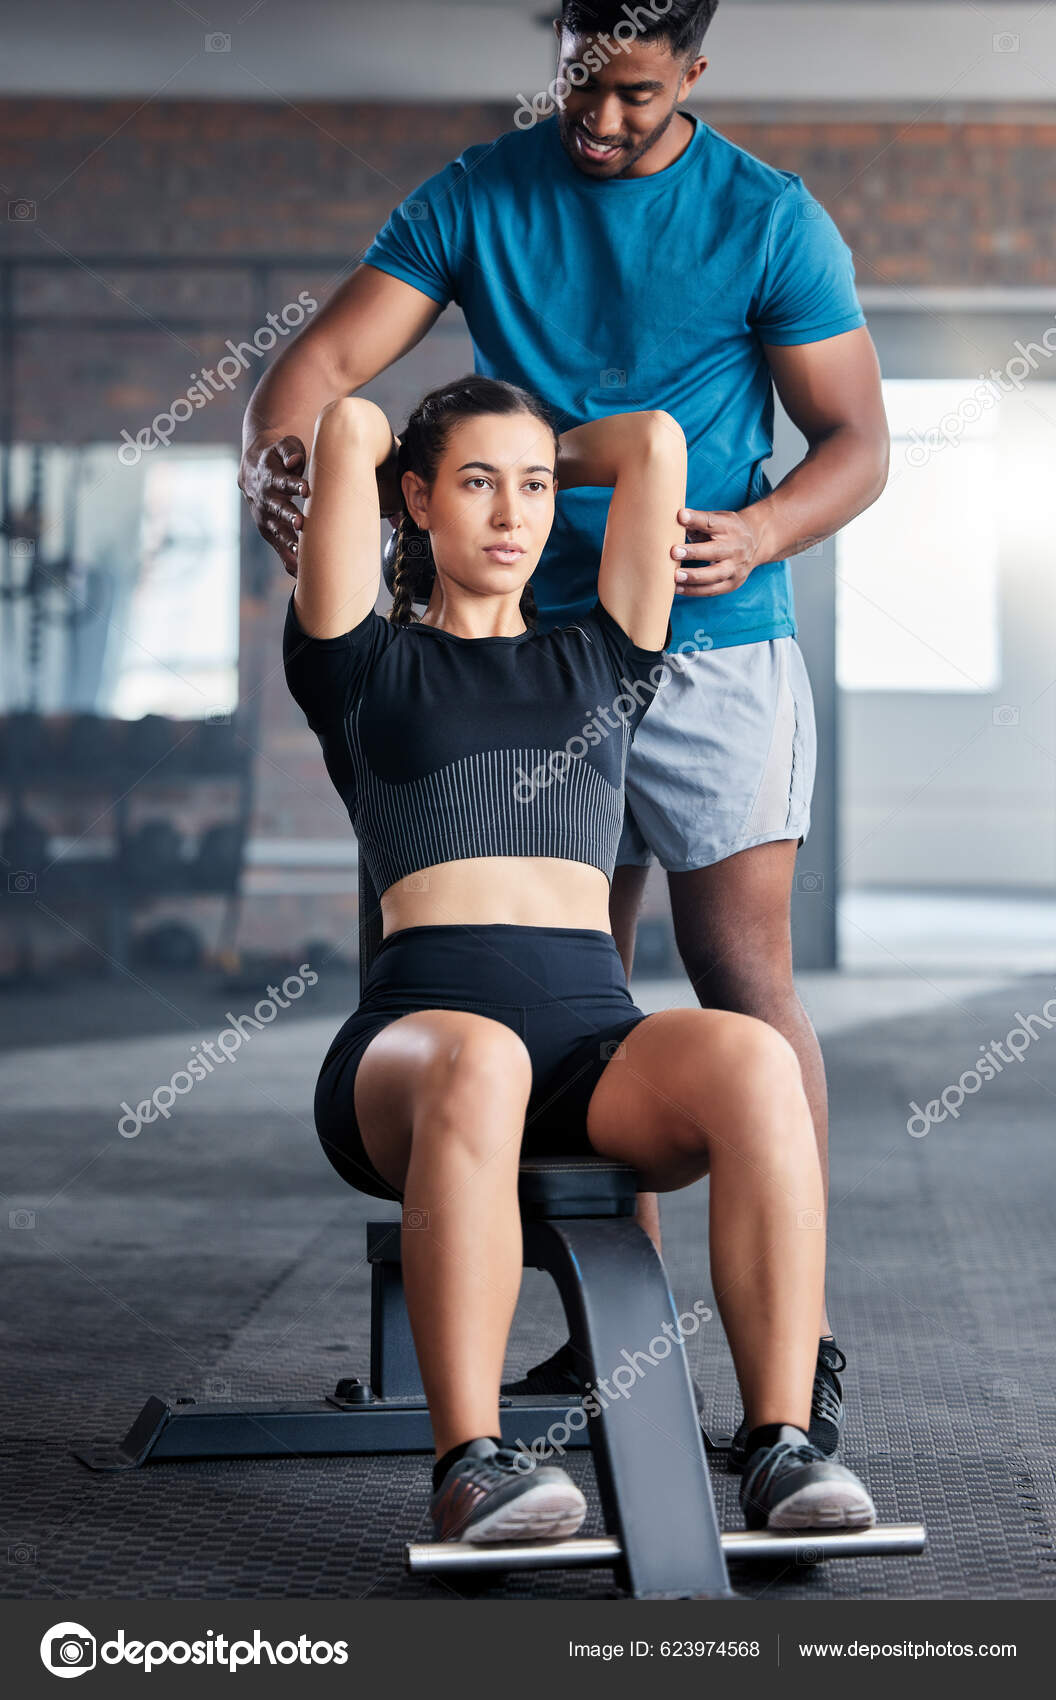 female personal trainer Archives